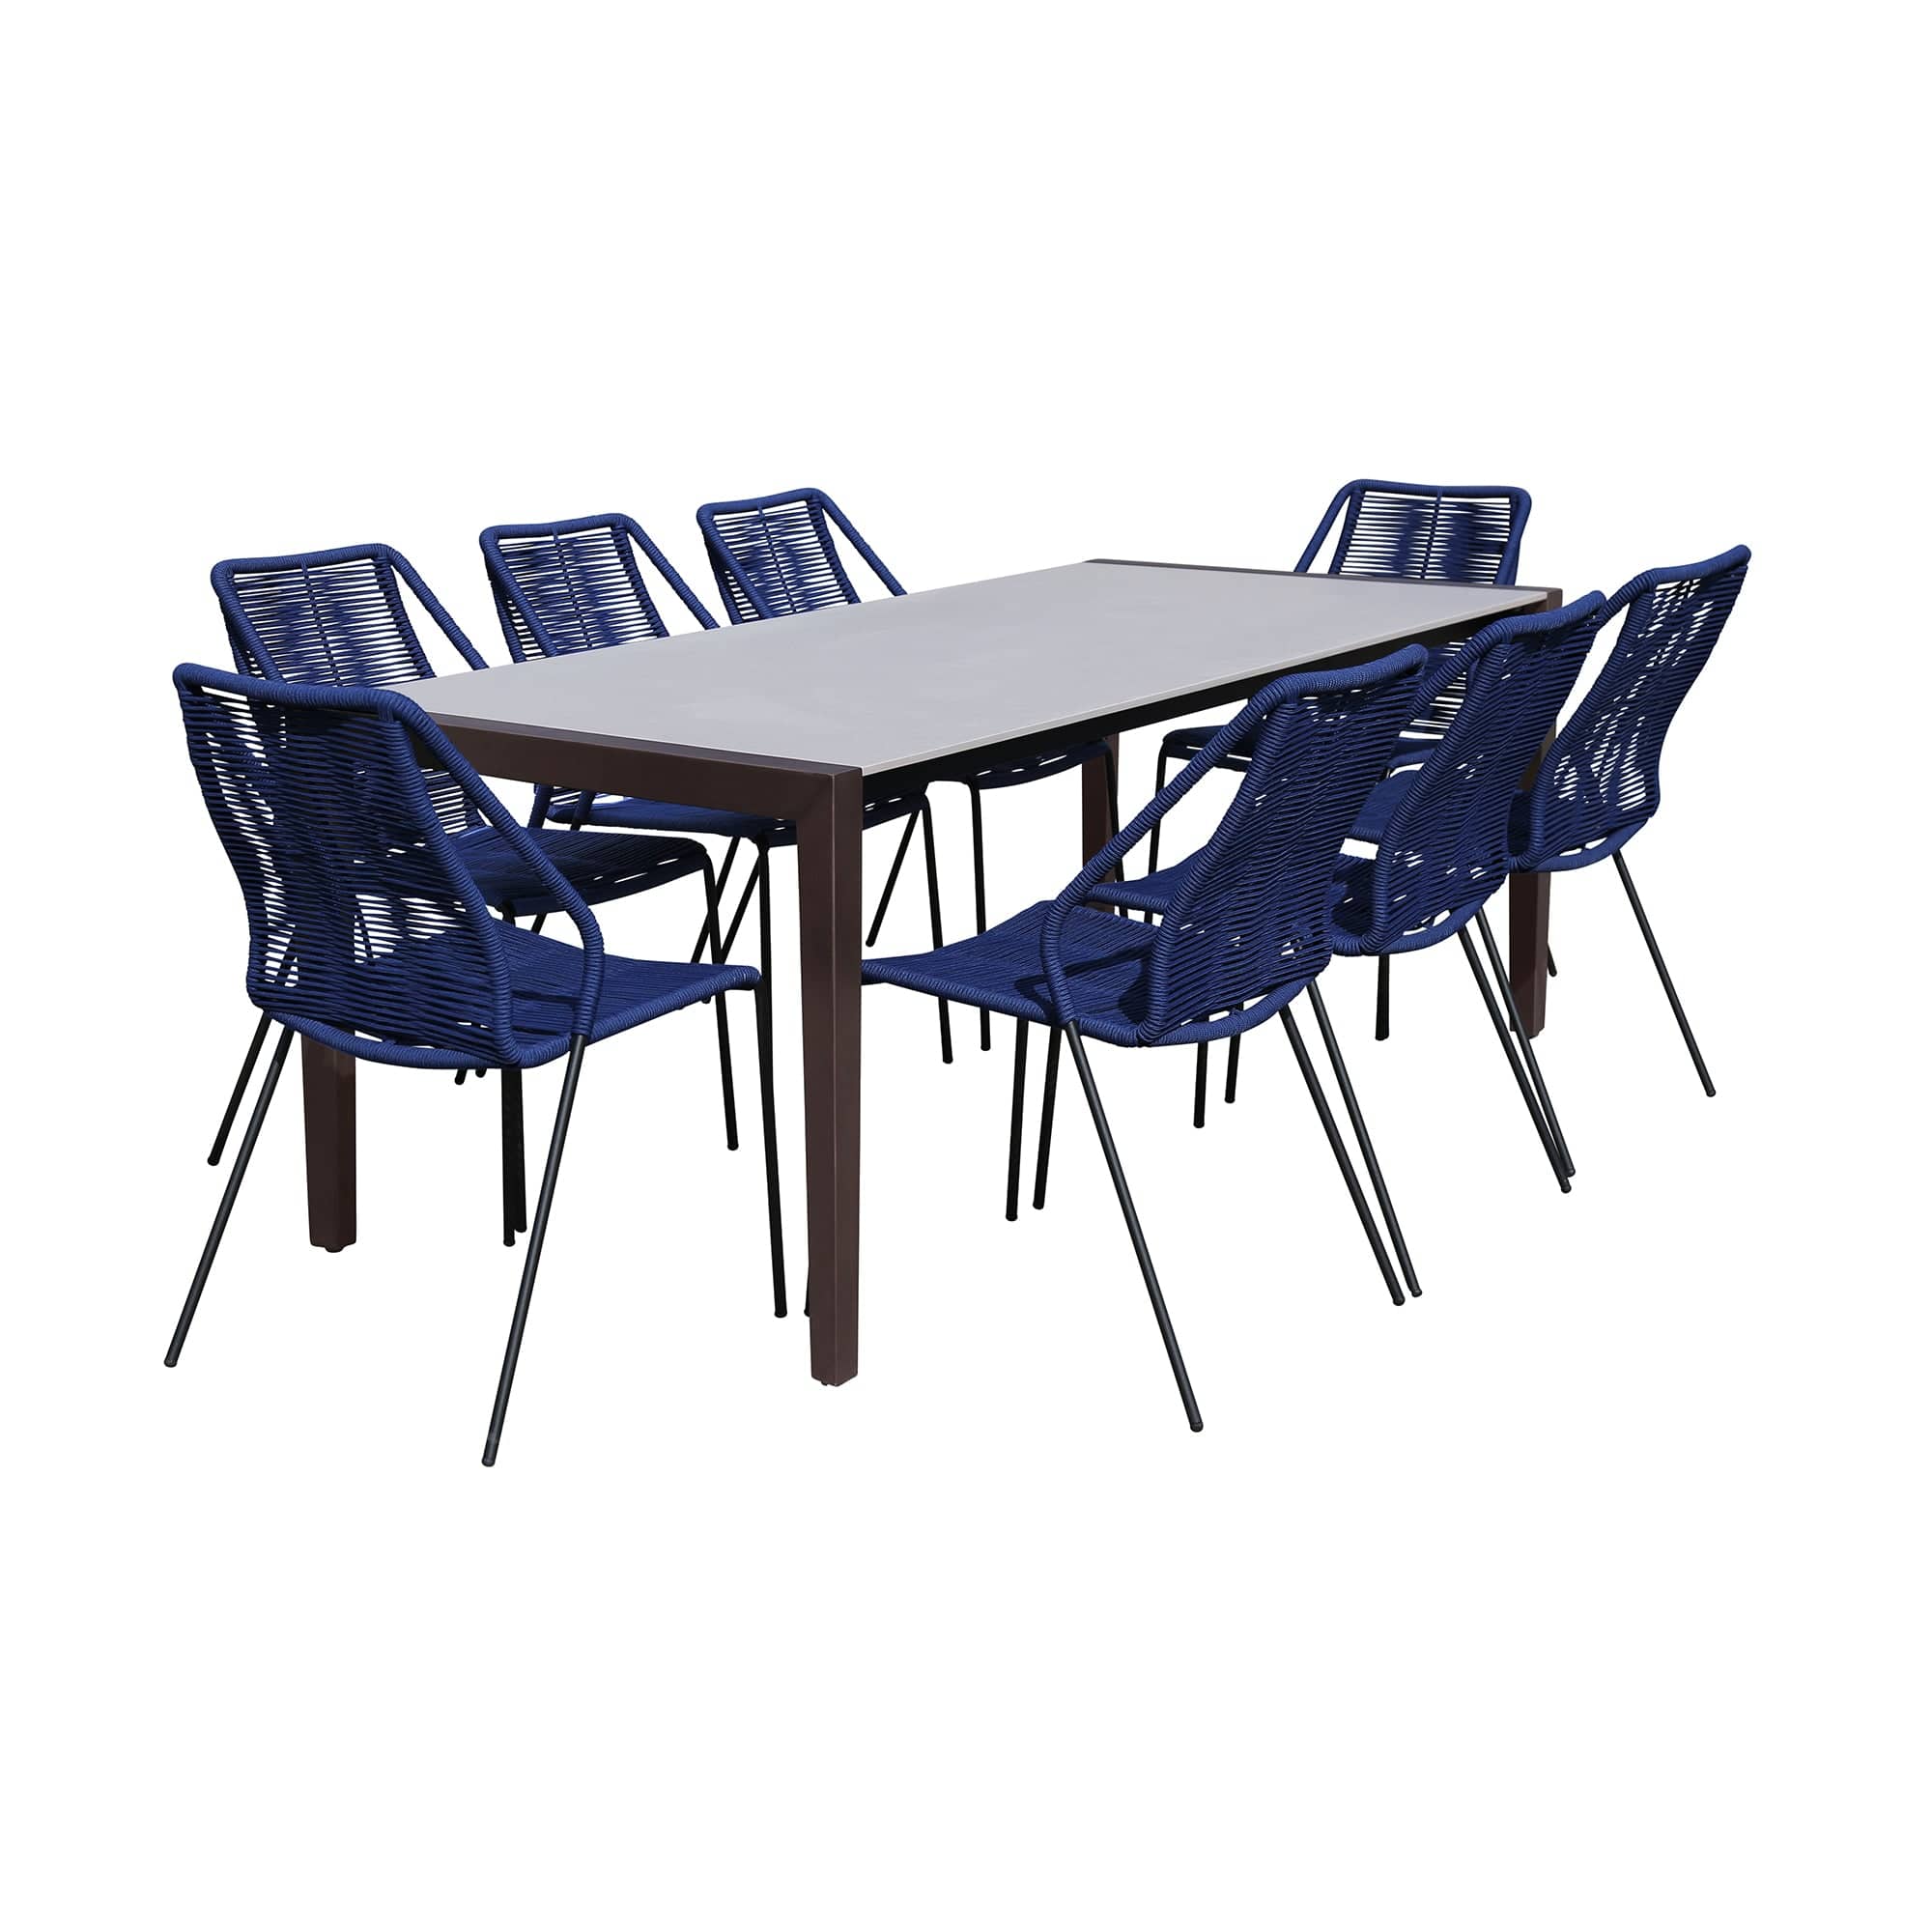 Armen Living Outdoor Dining Set Blue Rope Armen Living | Fineline and Clip Indoor Outdoor 9 Piece Dining Set in Dark Eucalyptus Wood with Superstone and Rope | SETFLDIDK9CP